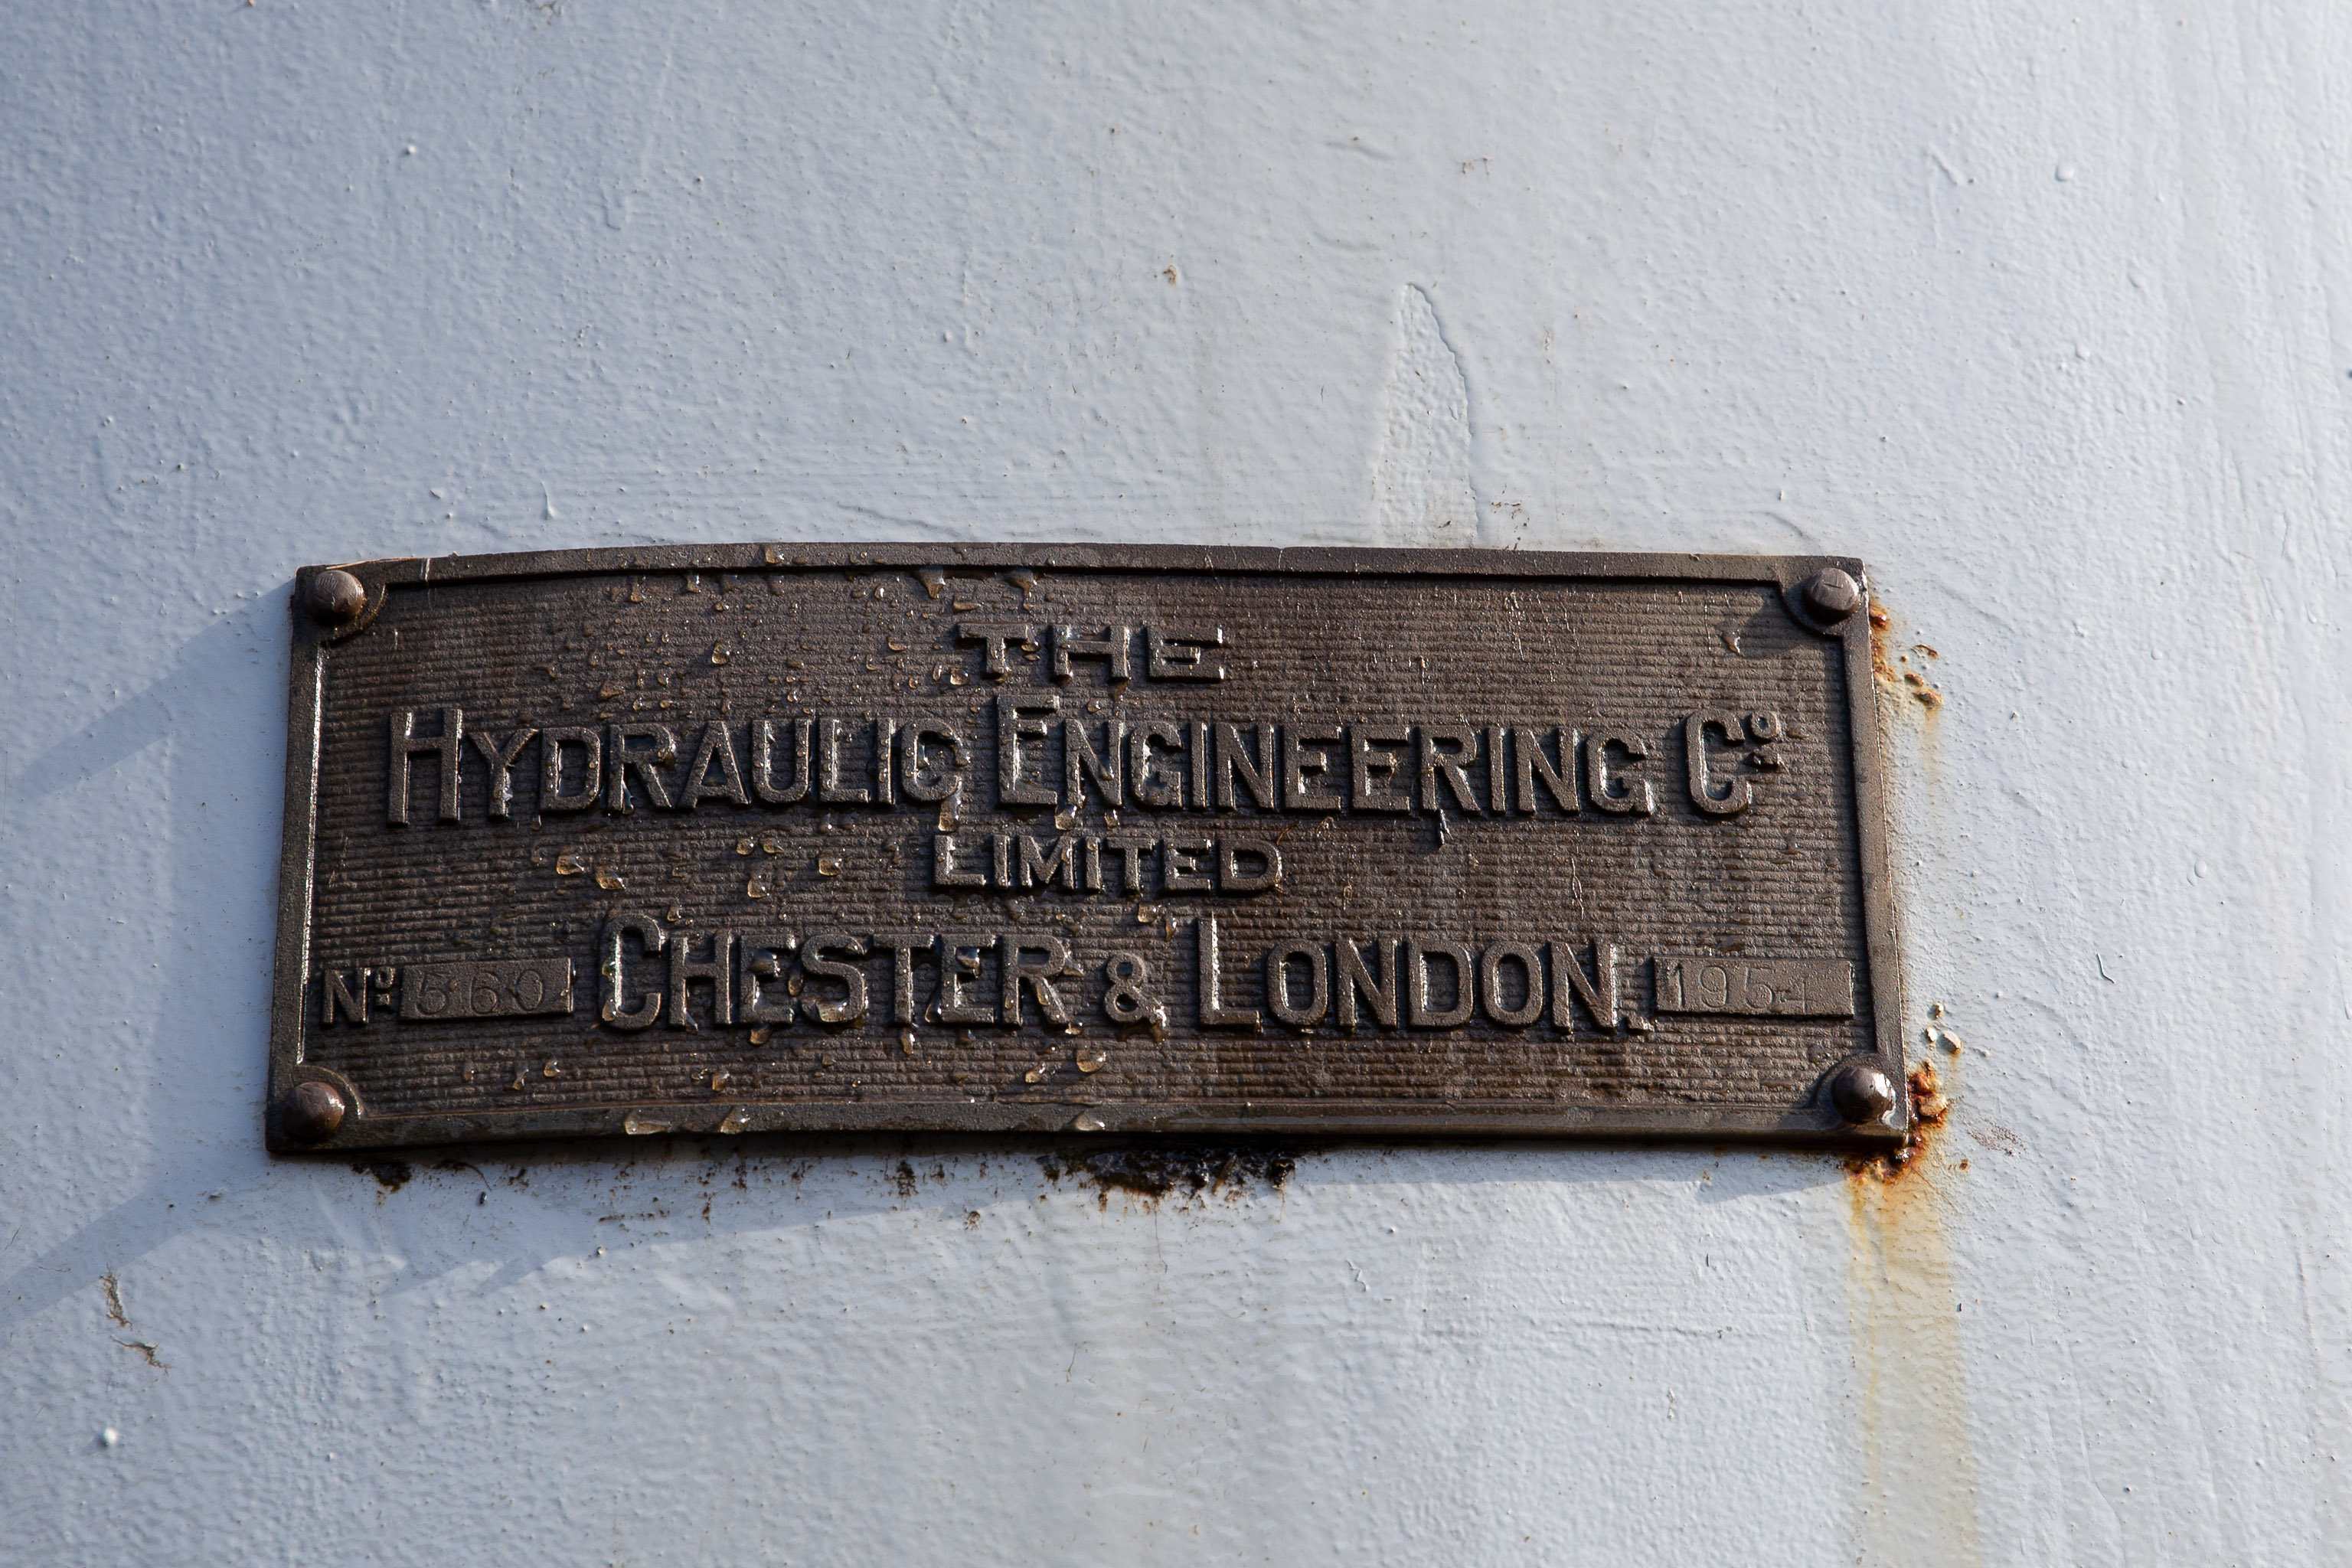 The Hydraulic Engineering Company Ltd
Specialists in hydraulic machinery. They had a long history of hydraulic development before 1954, having started in the late 1800s.
